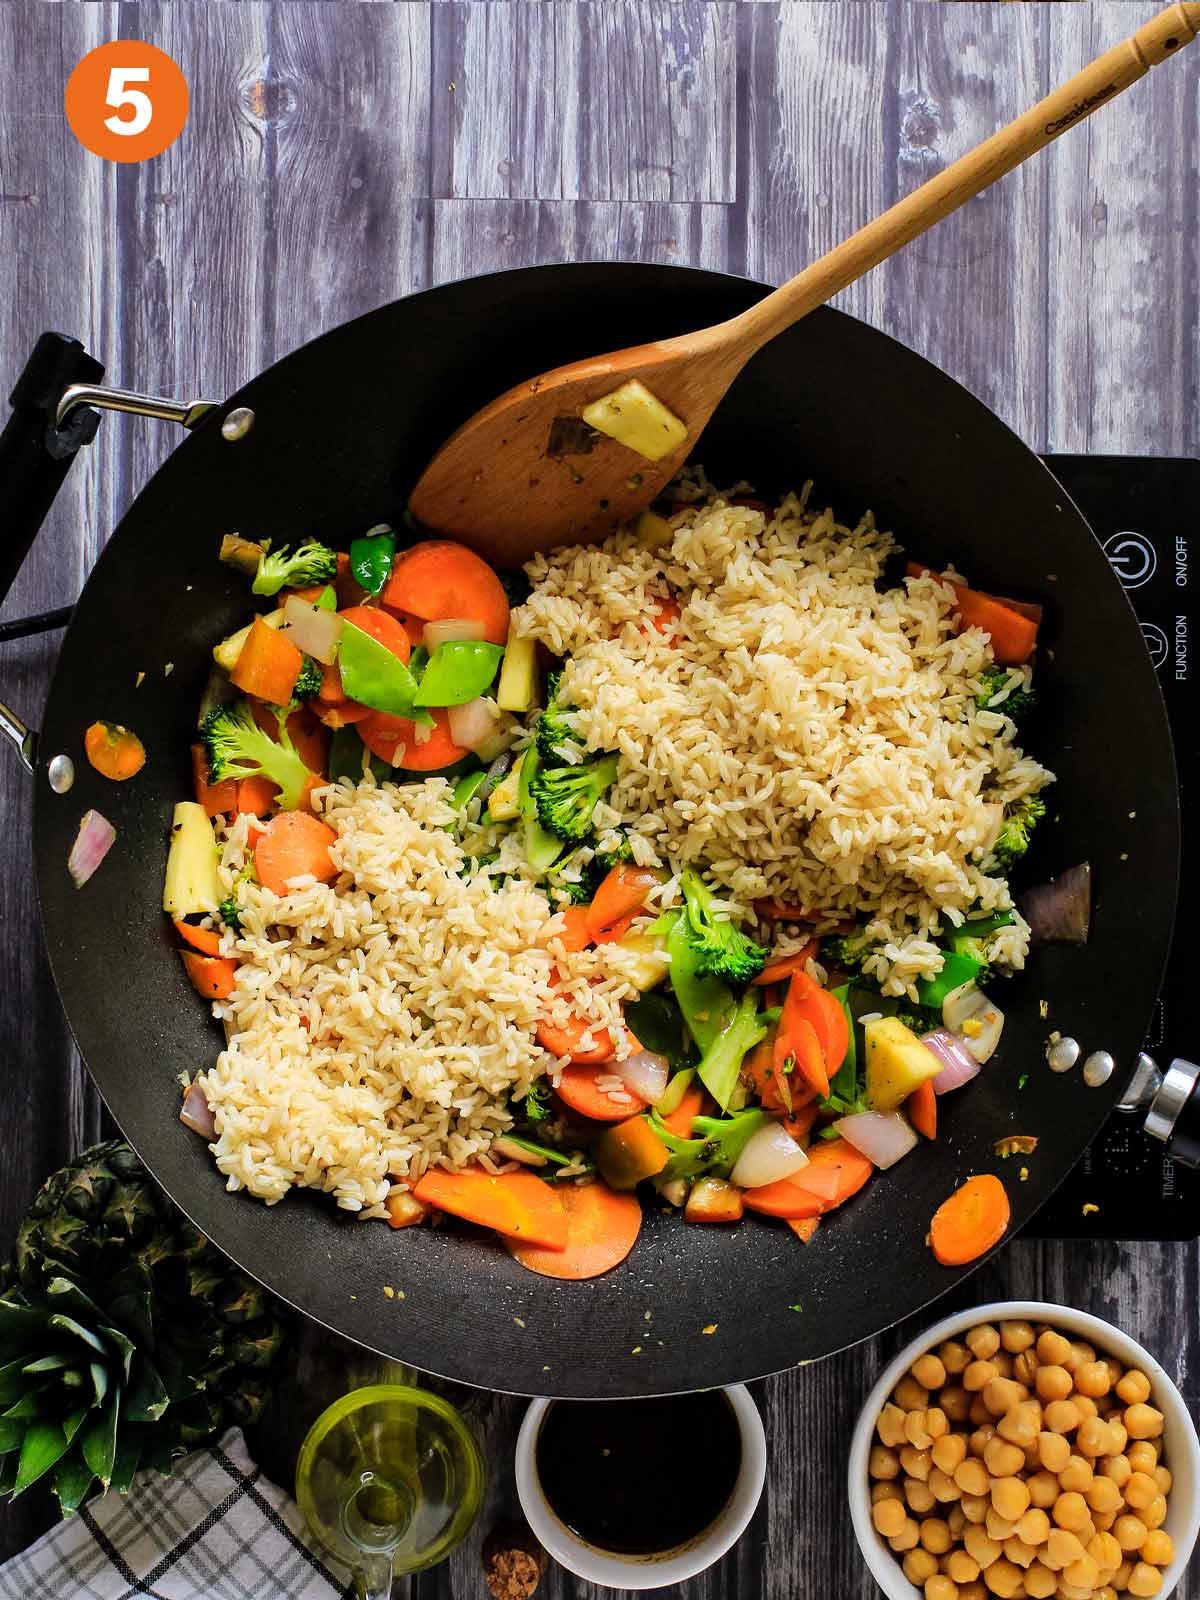 Rice is added to wok with cooked vegetables.